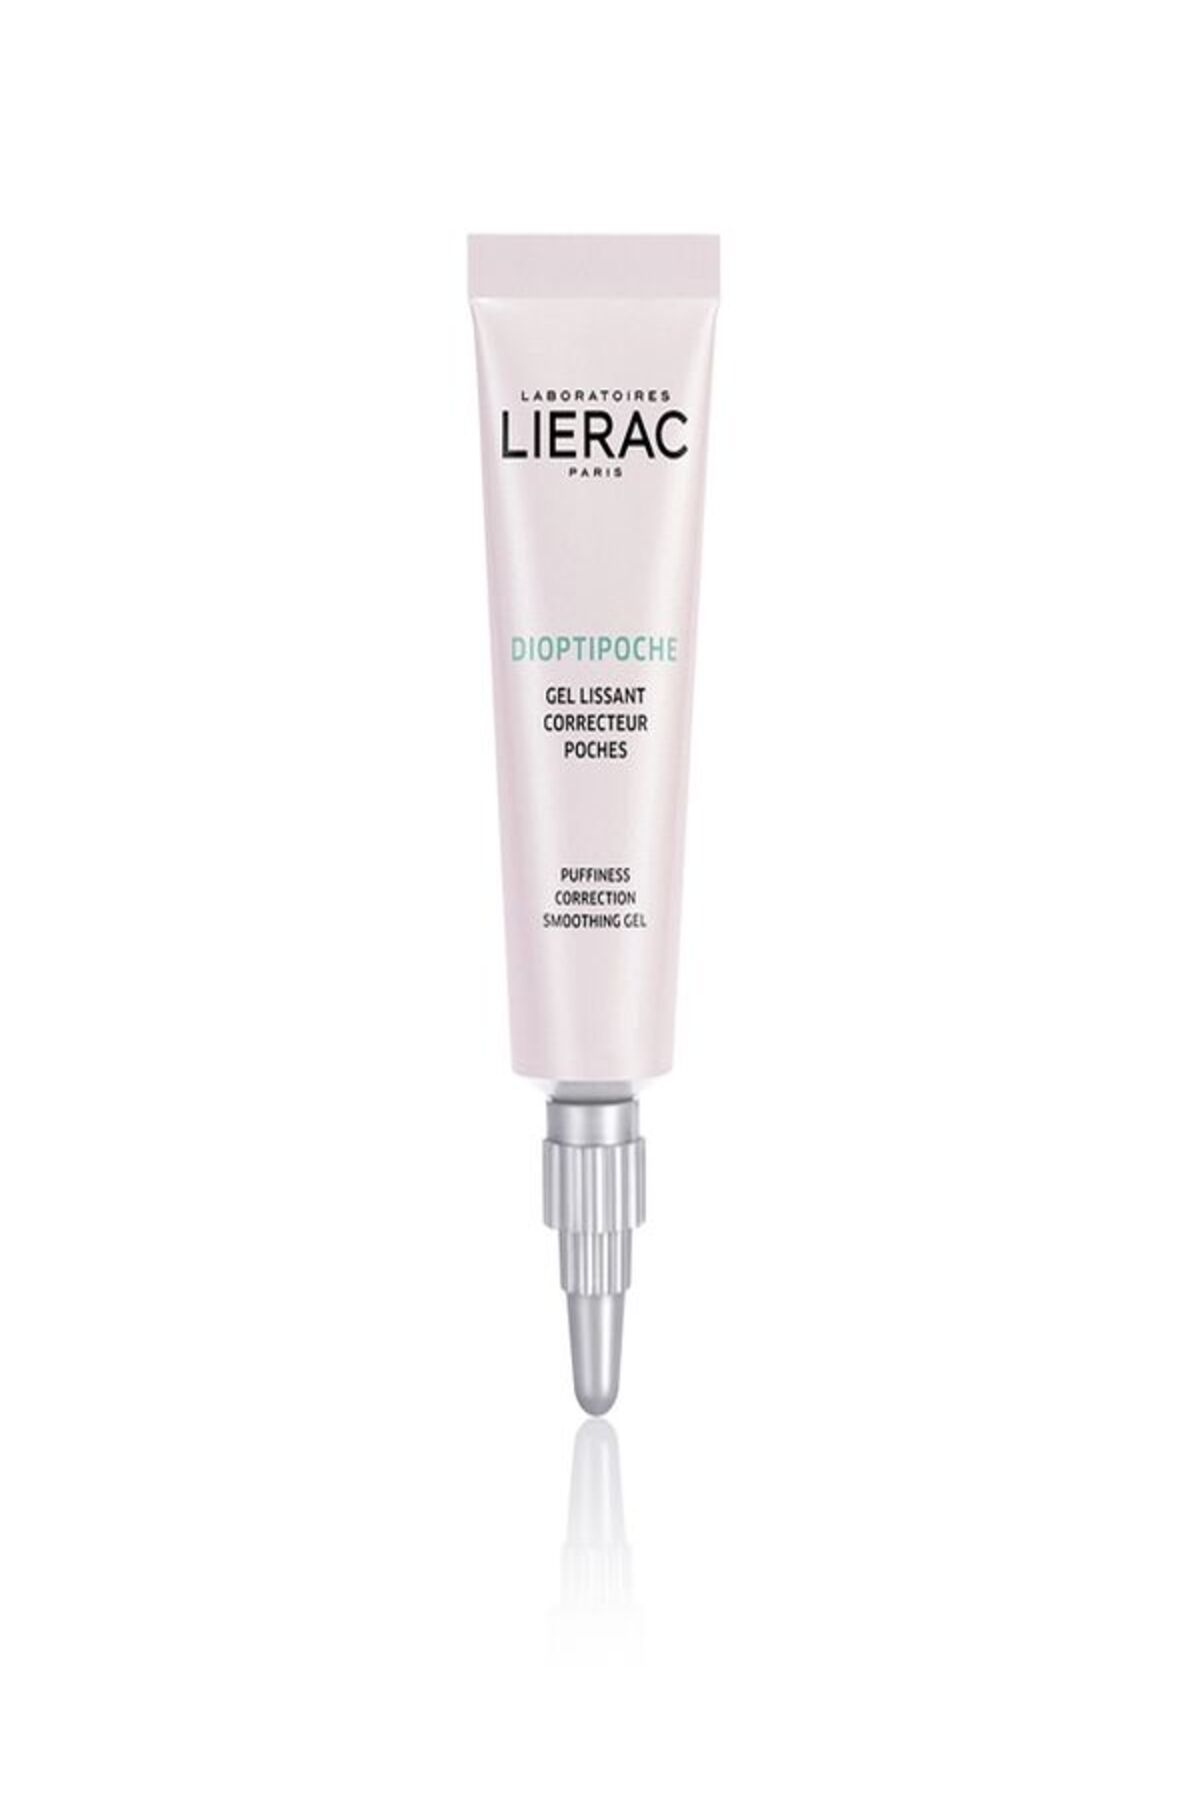 Lierac DIOPTI POCHE PUFFINESS CORRECTION SMOOTHING GEL-15 ML